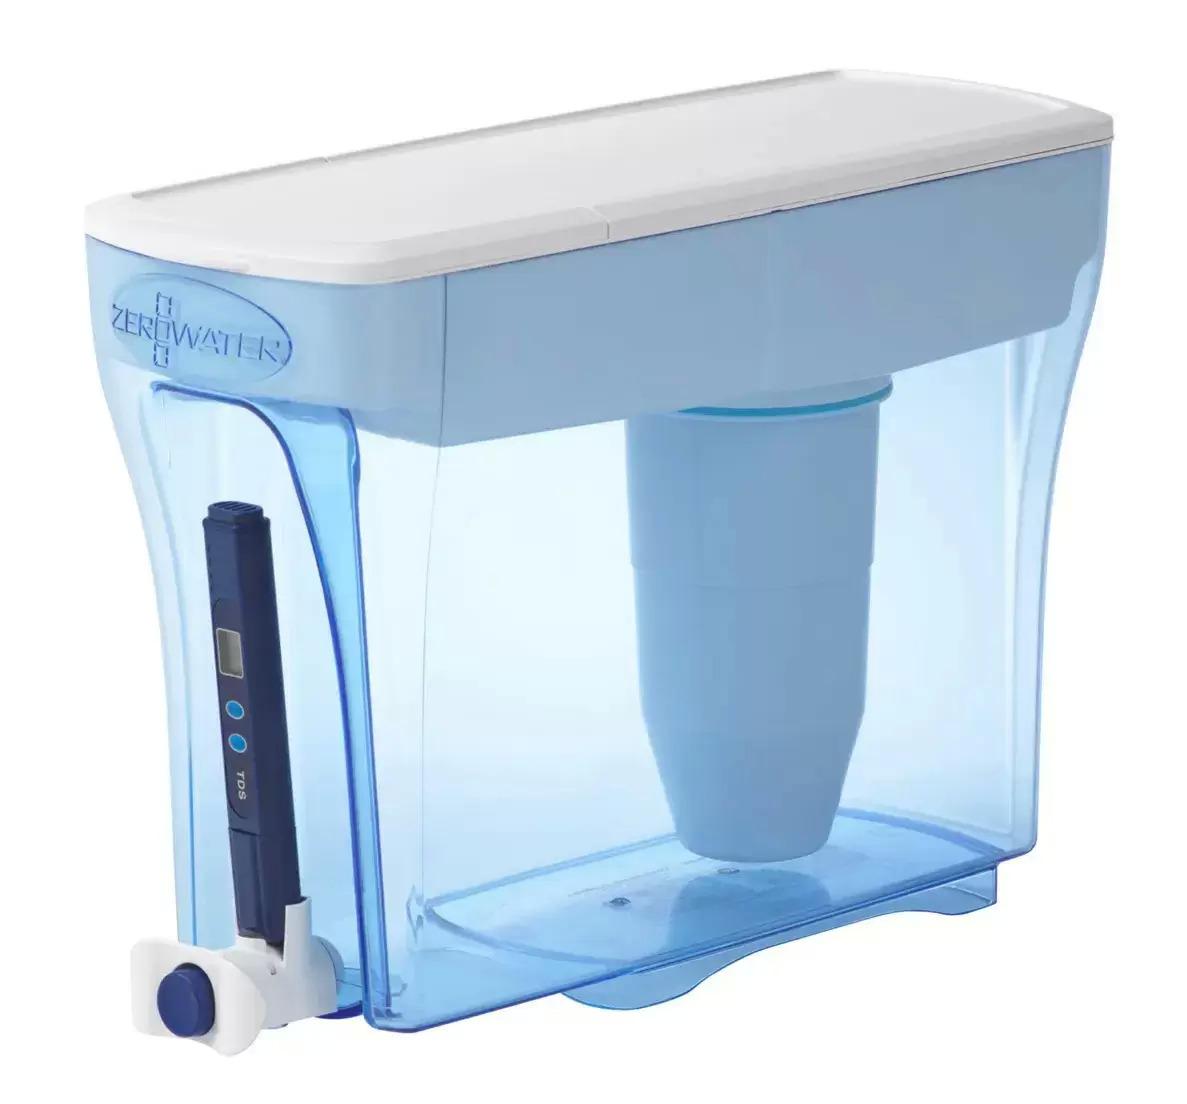 ZeroWater 30 Cup Water Filtering Dispenser for $34.99